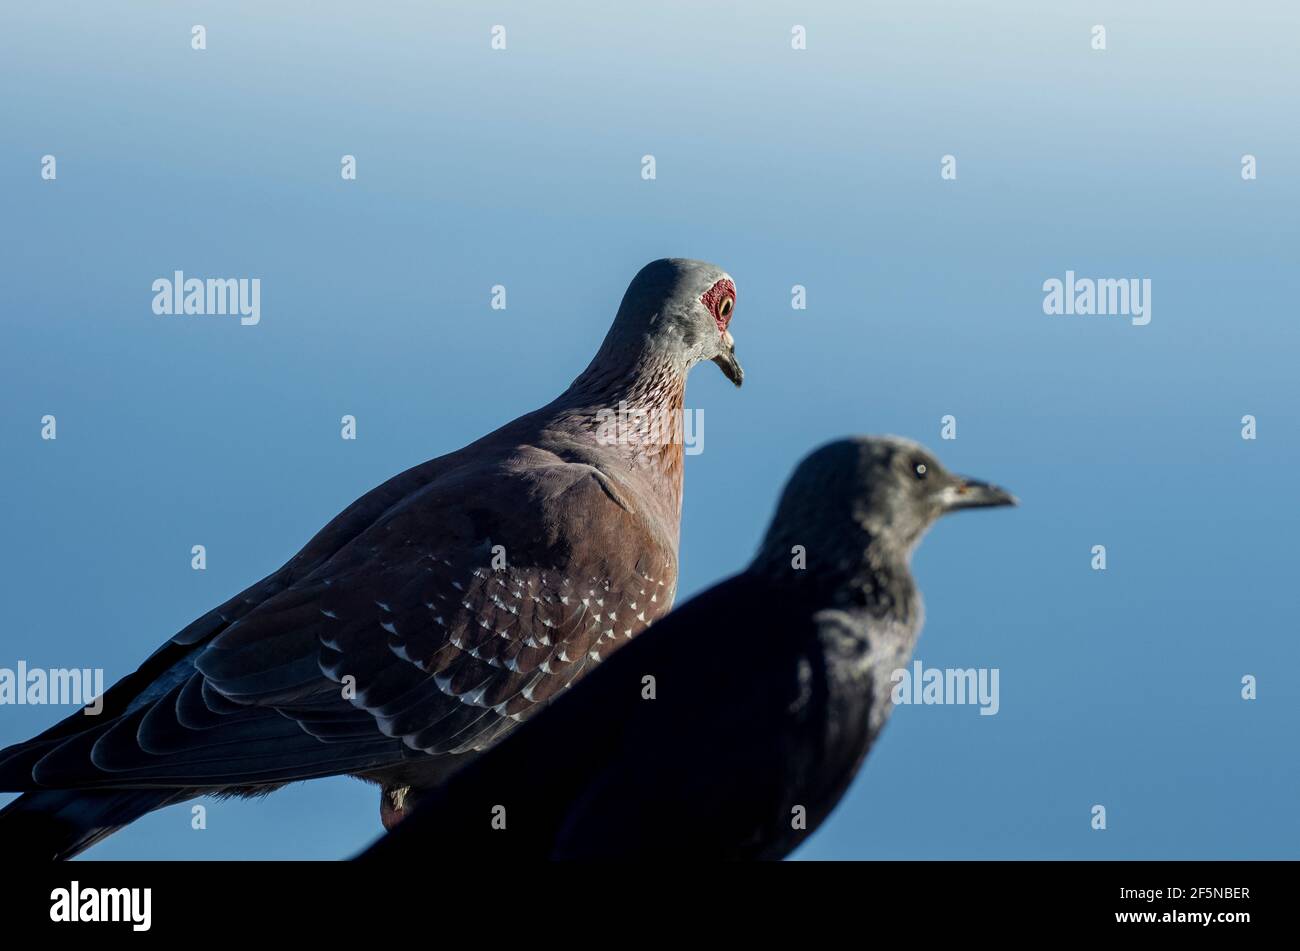 An African Rock Pigeon / Speckled pigeon (Columba guinea) and a Red Winged Starling (Onychognathus morio ) on Table Mountain, Cape Town, South Africa. Stock Photo